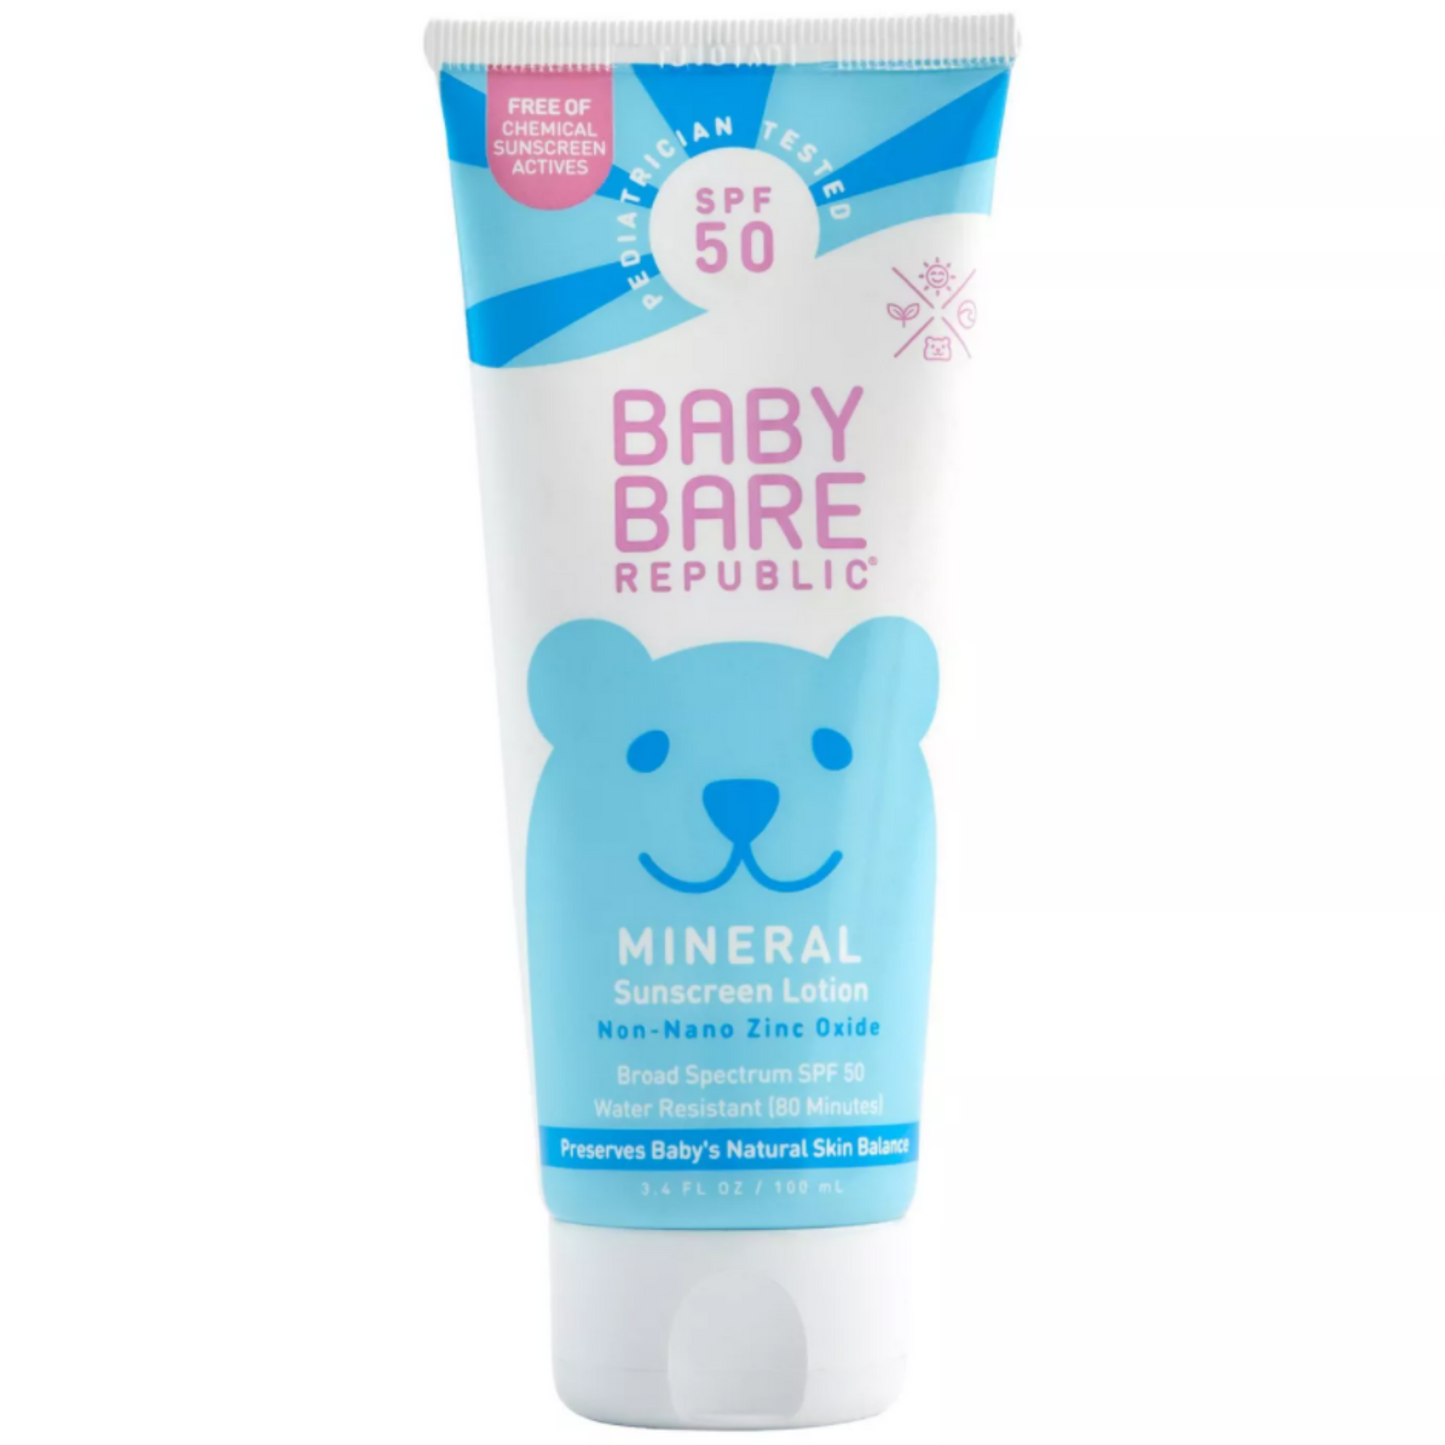 Primary image of SPF 50 Mineral Baby Sunscreen Lotion